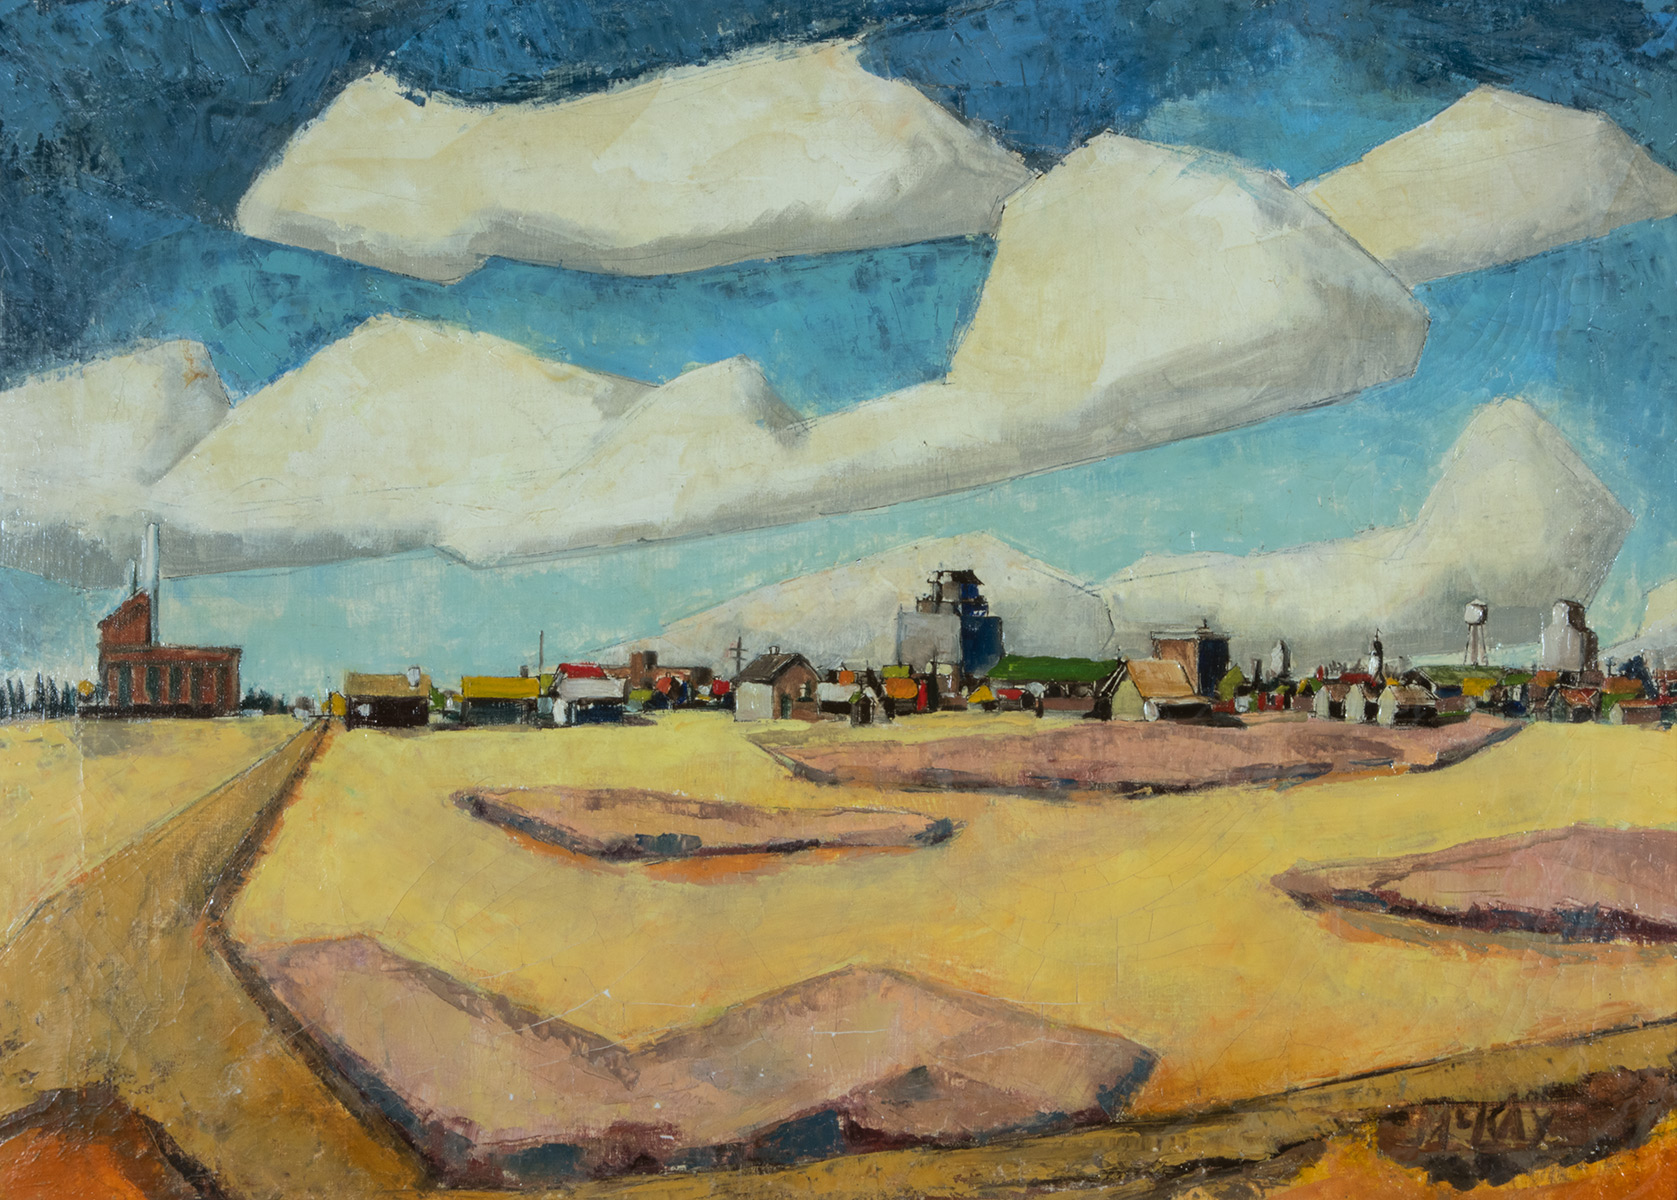 Painting of a prairie landscape with yellow ground and blue sky. Small buildings stand on the horizon and all shapes in the piece, including clouds, are blocky with straight edges.